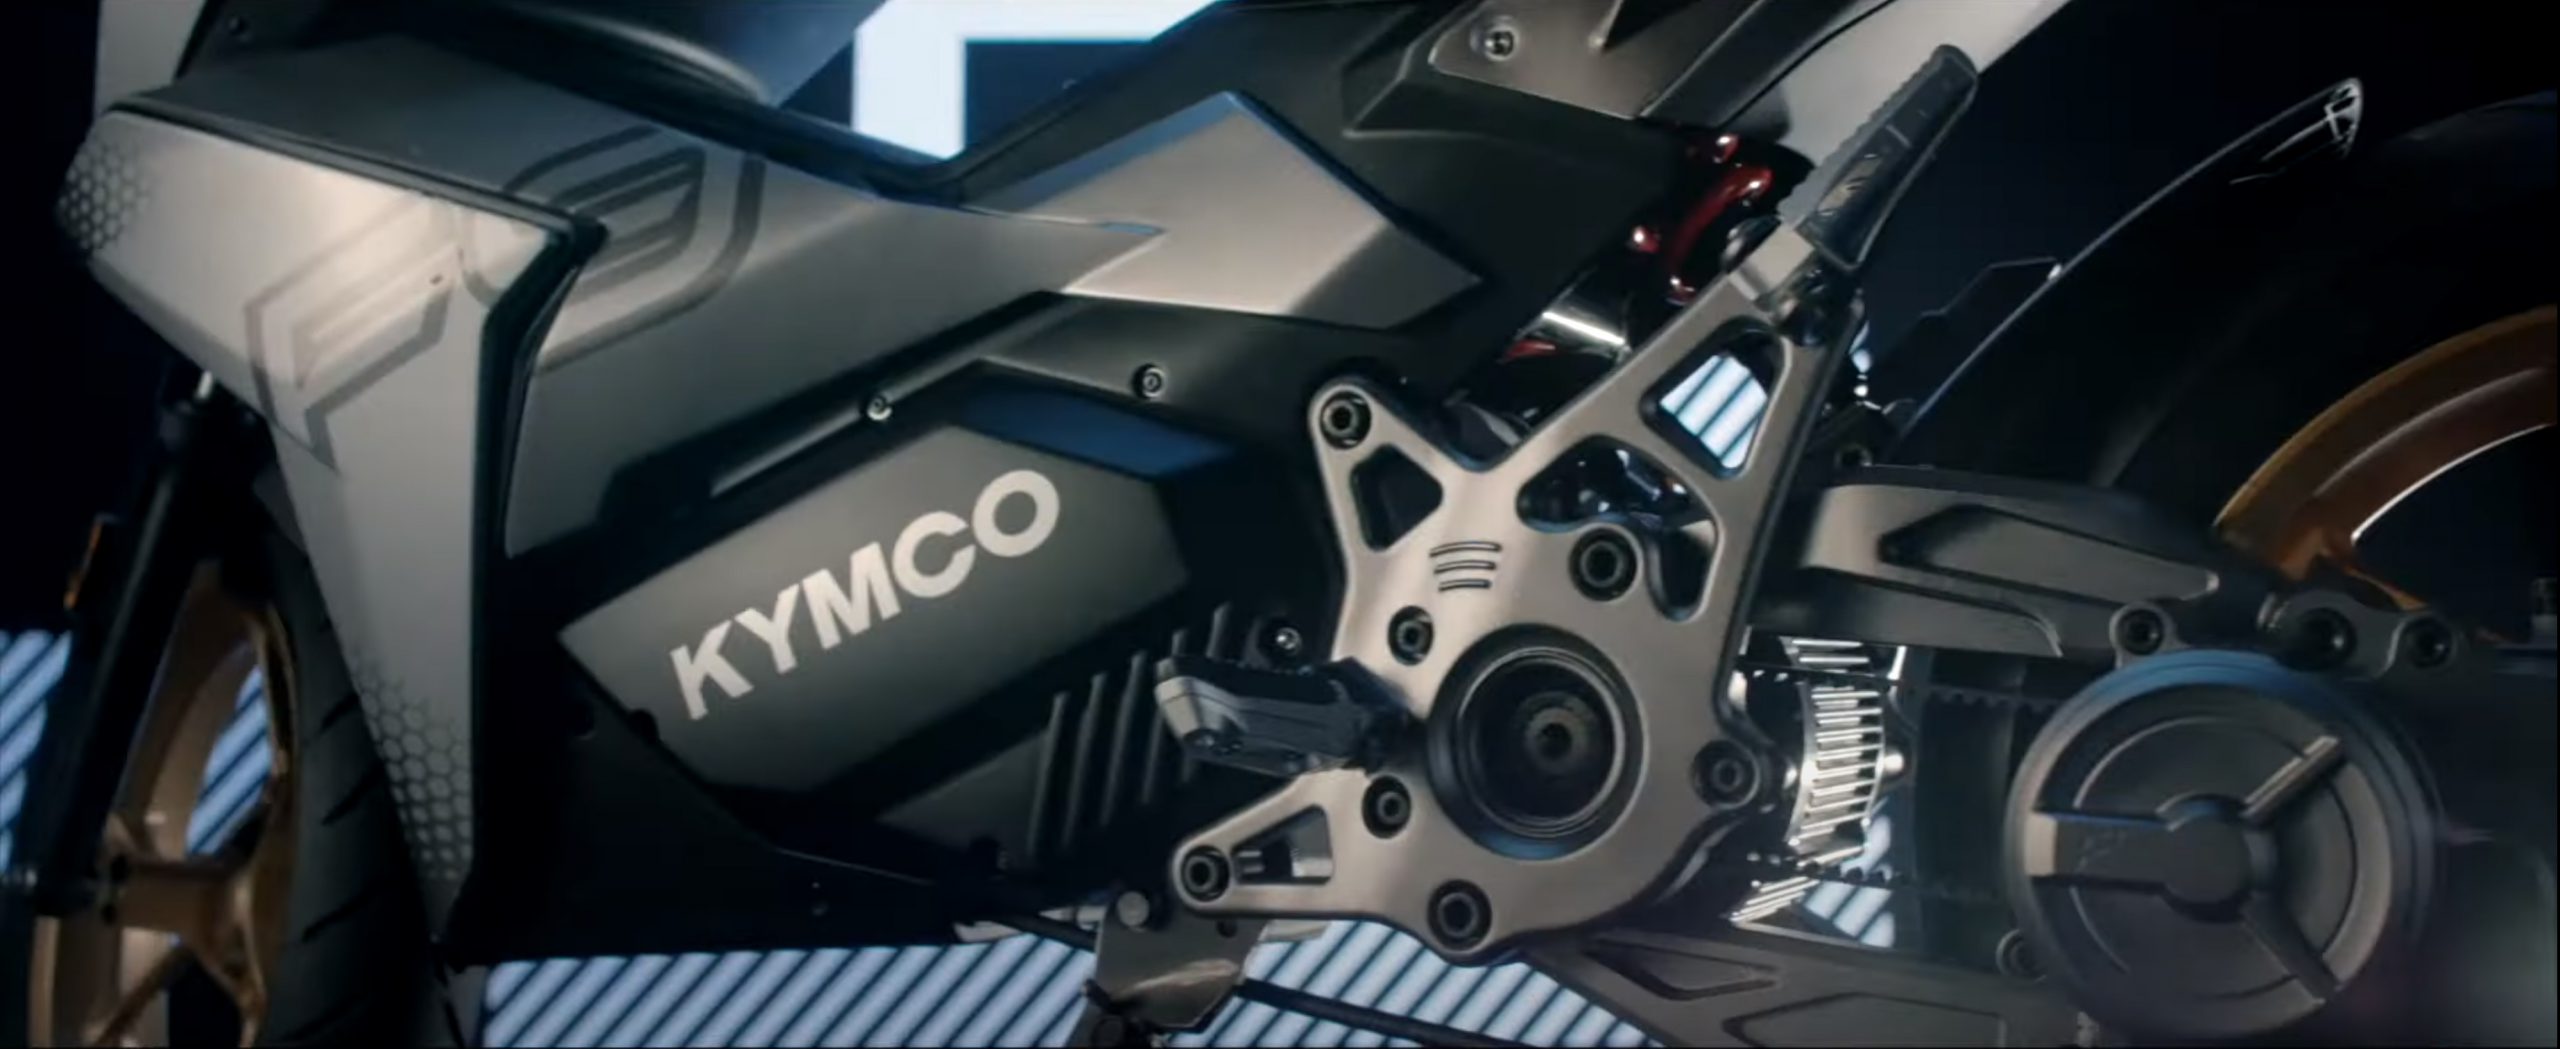 KYMCO F9 Electric Scooter